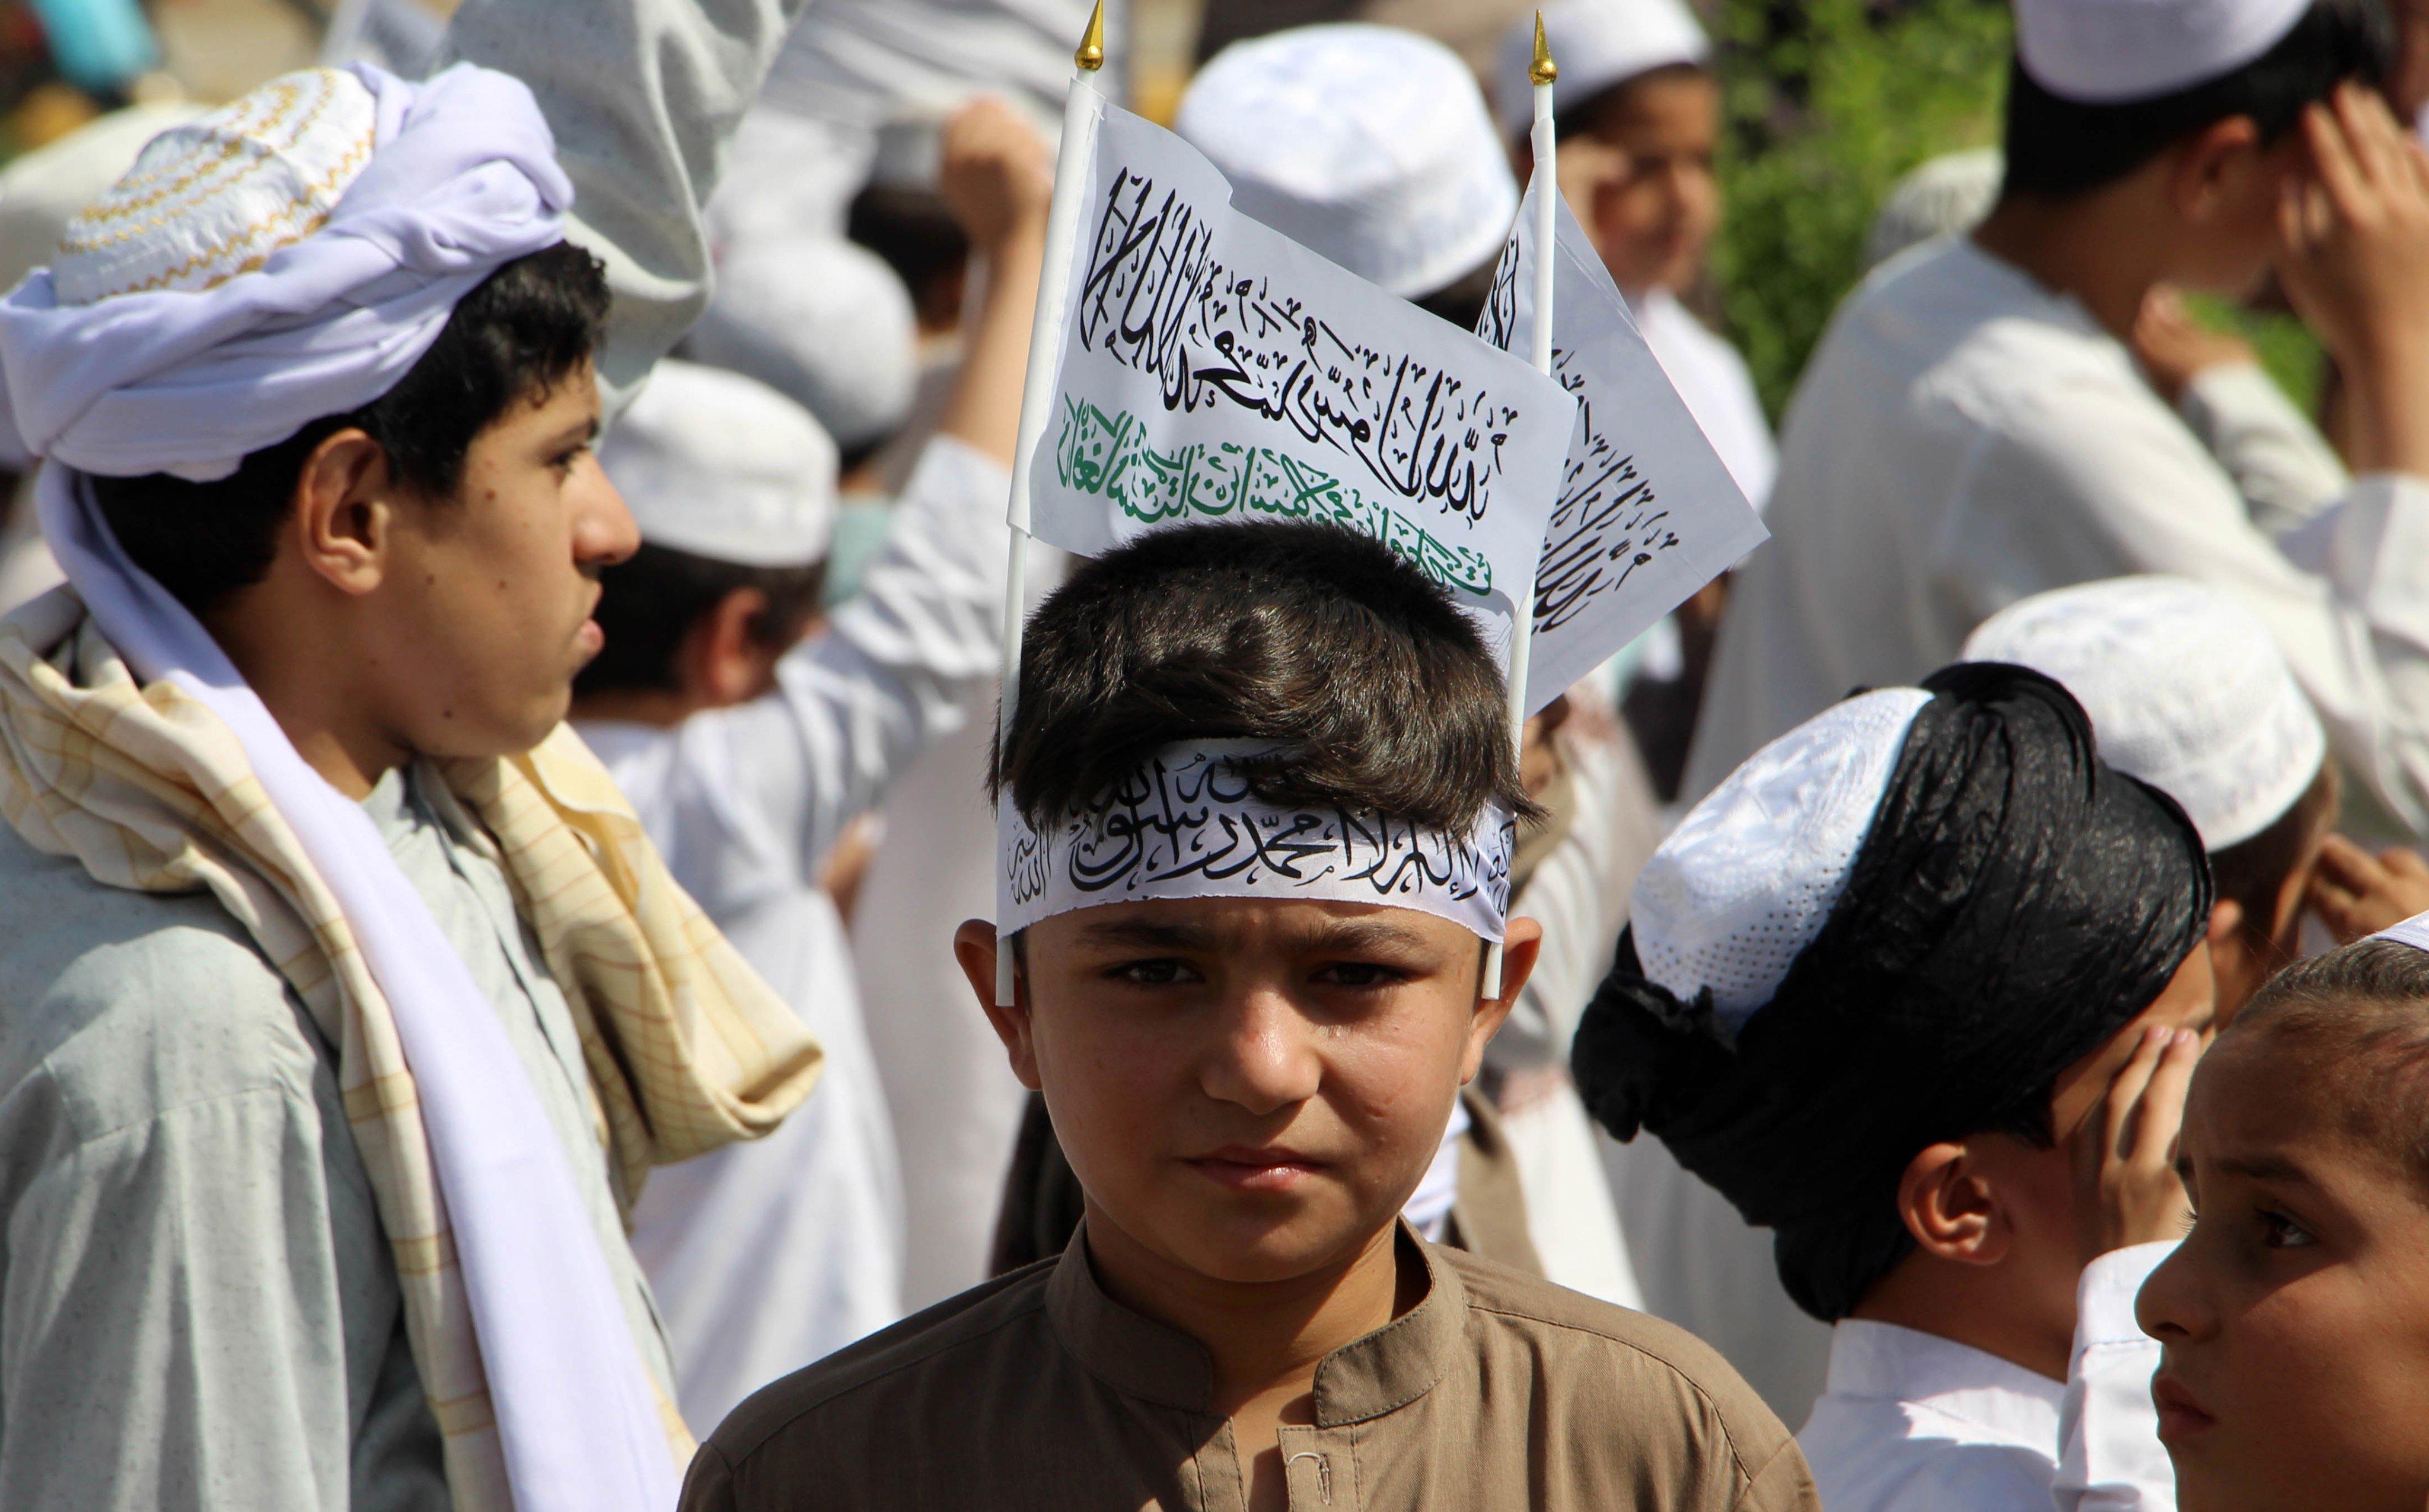 Afghan boys gather to mark the second anniversary of the US withdrawal, in Kandahar, Afghanistan, on August 31. With its extreme interpretation of Islam, the Taliban is seeking to turn Afghanistan into an ideological state. Photo: EPA-EFE